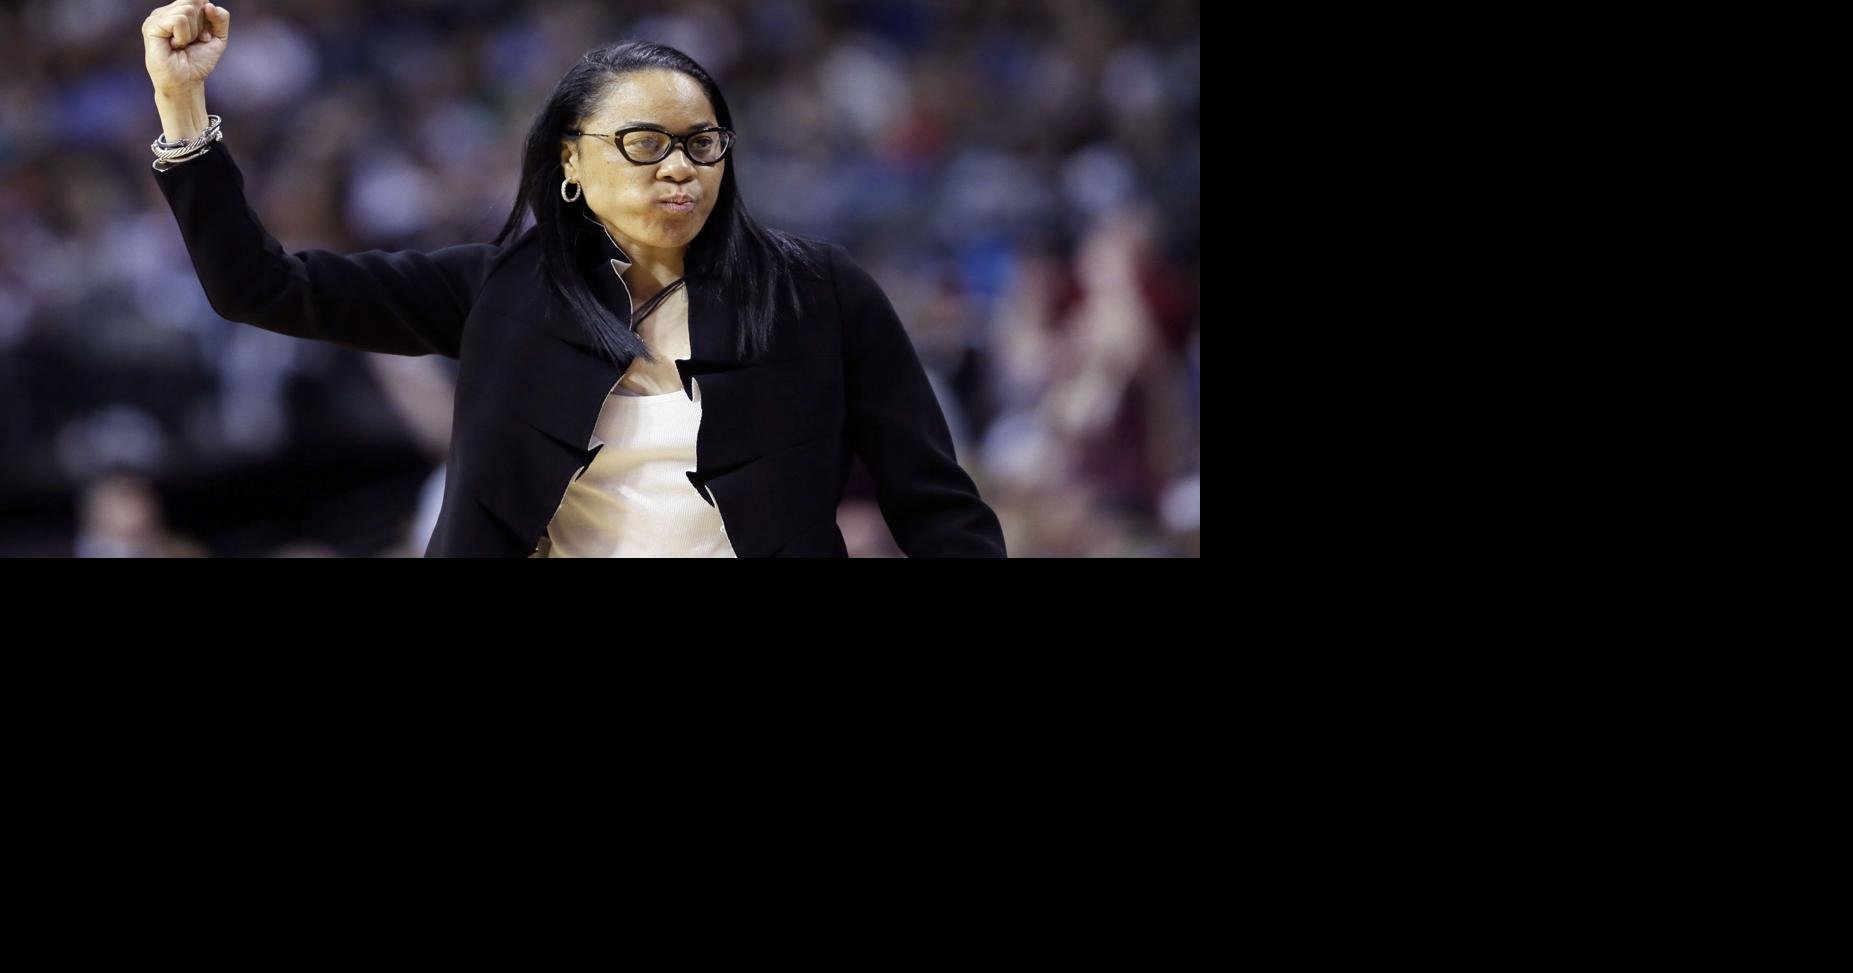 Is Dawn Staley Married?: Who Is Lisa Boyer To Her?